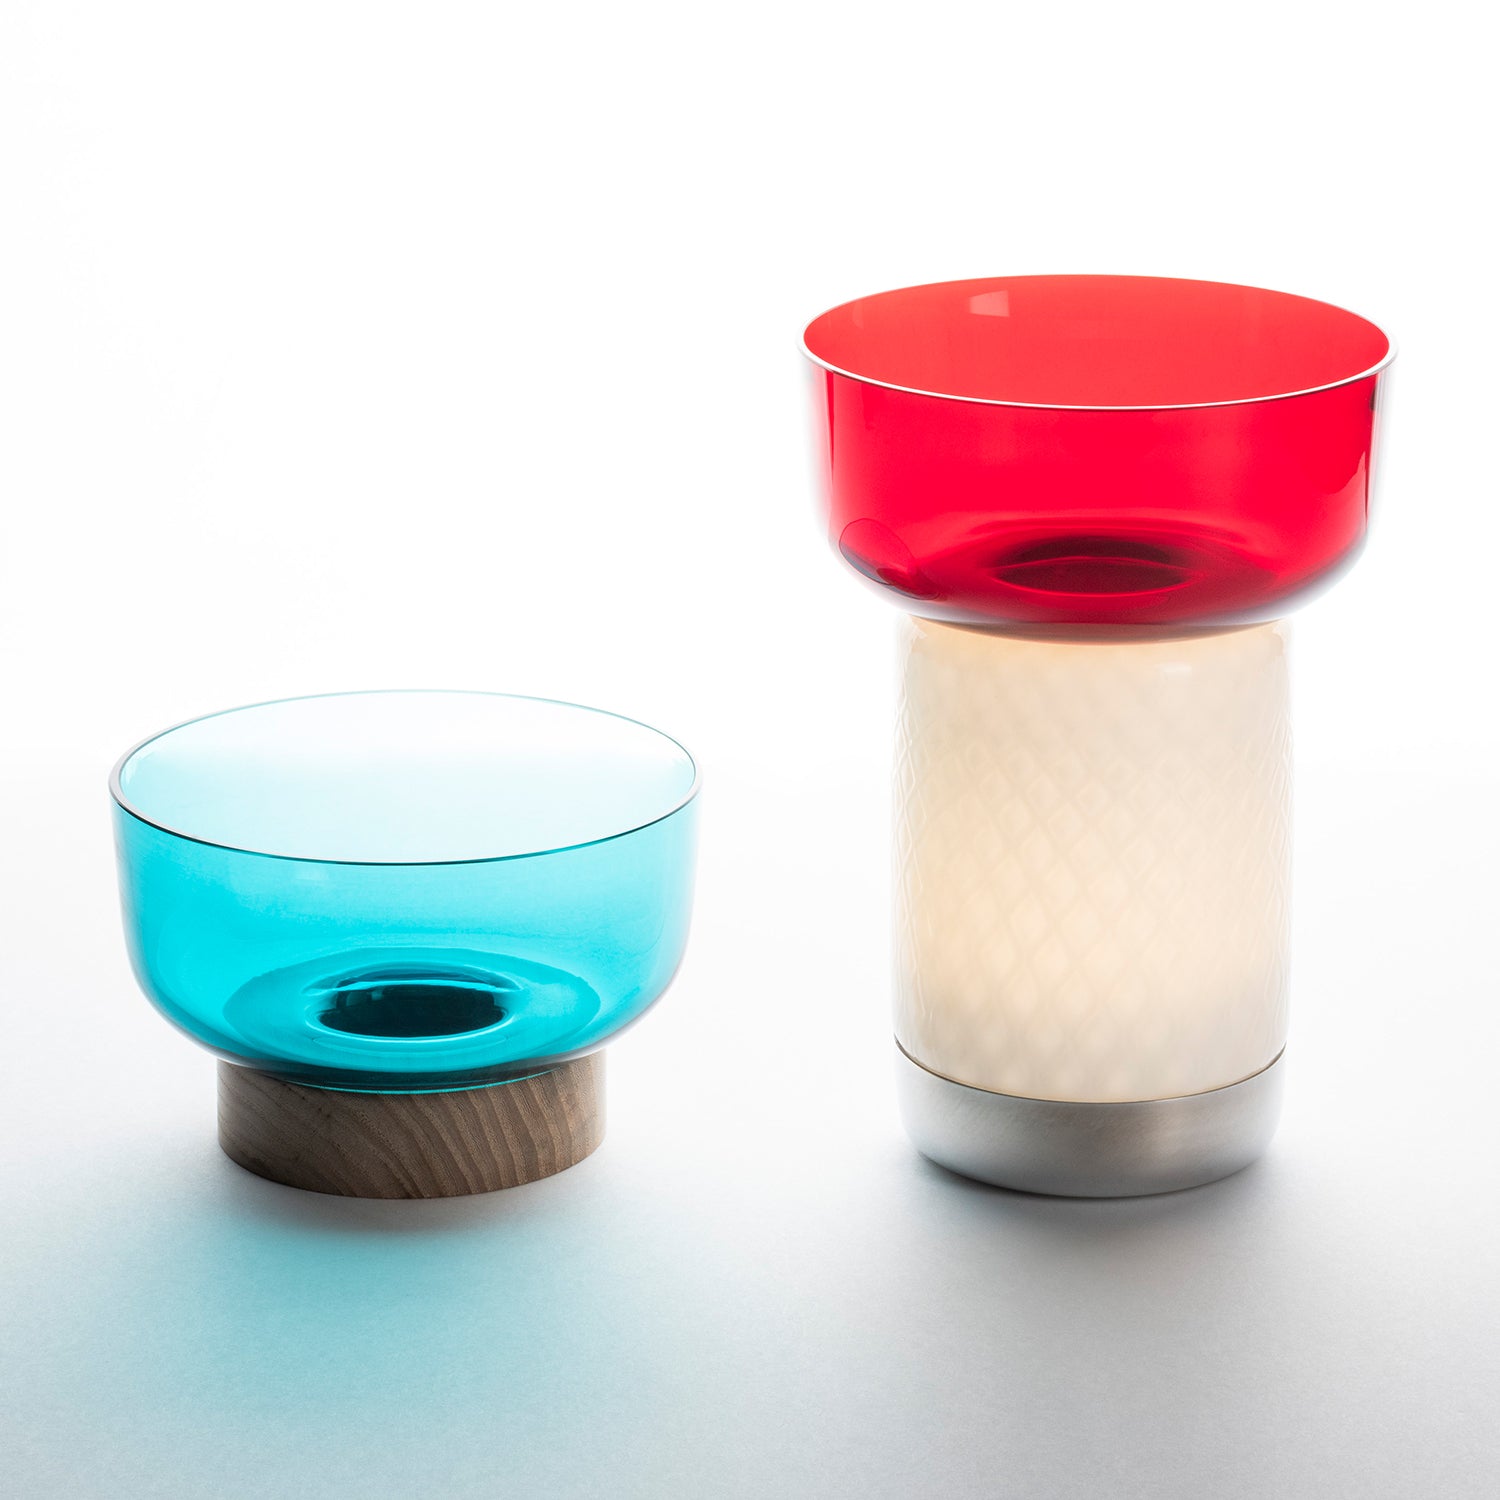 Artemide Bonta Portable Lamp & Bowl Ambience Image in red and turquoise